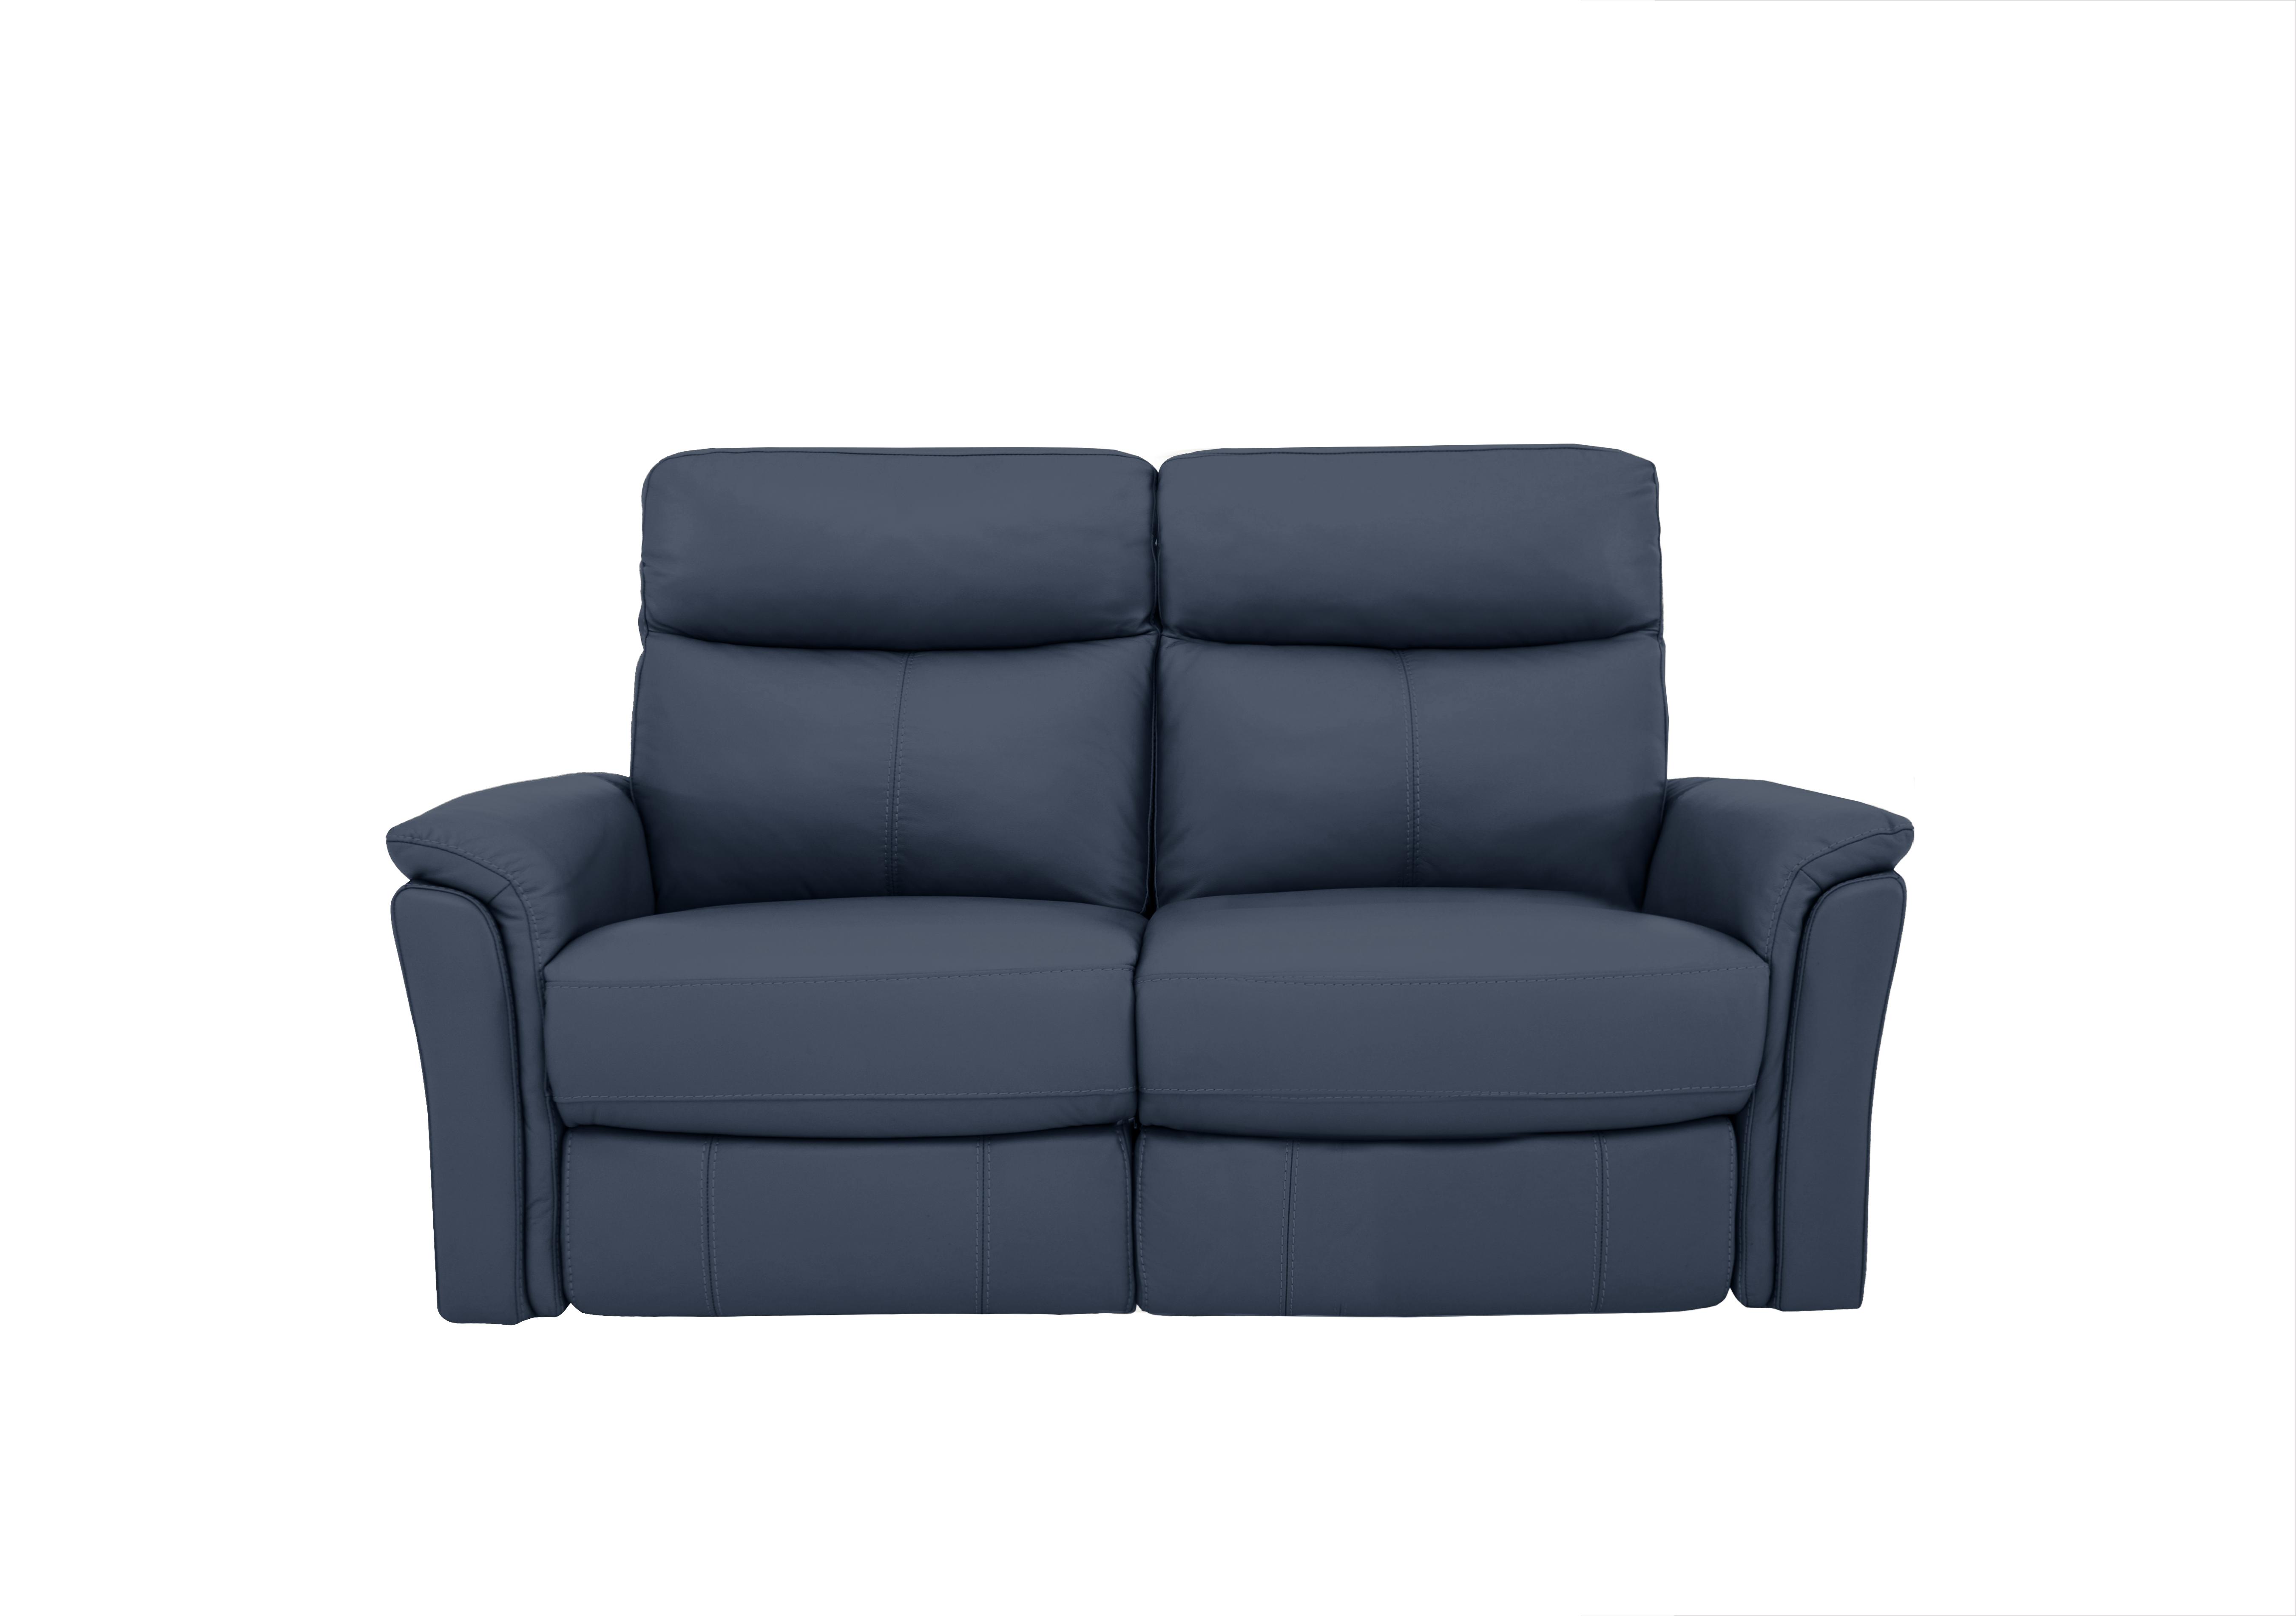 Compact Collection Piccolo 2 Seater Sofa in Bv-313e Ocean Blue on Furniture Village